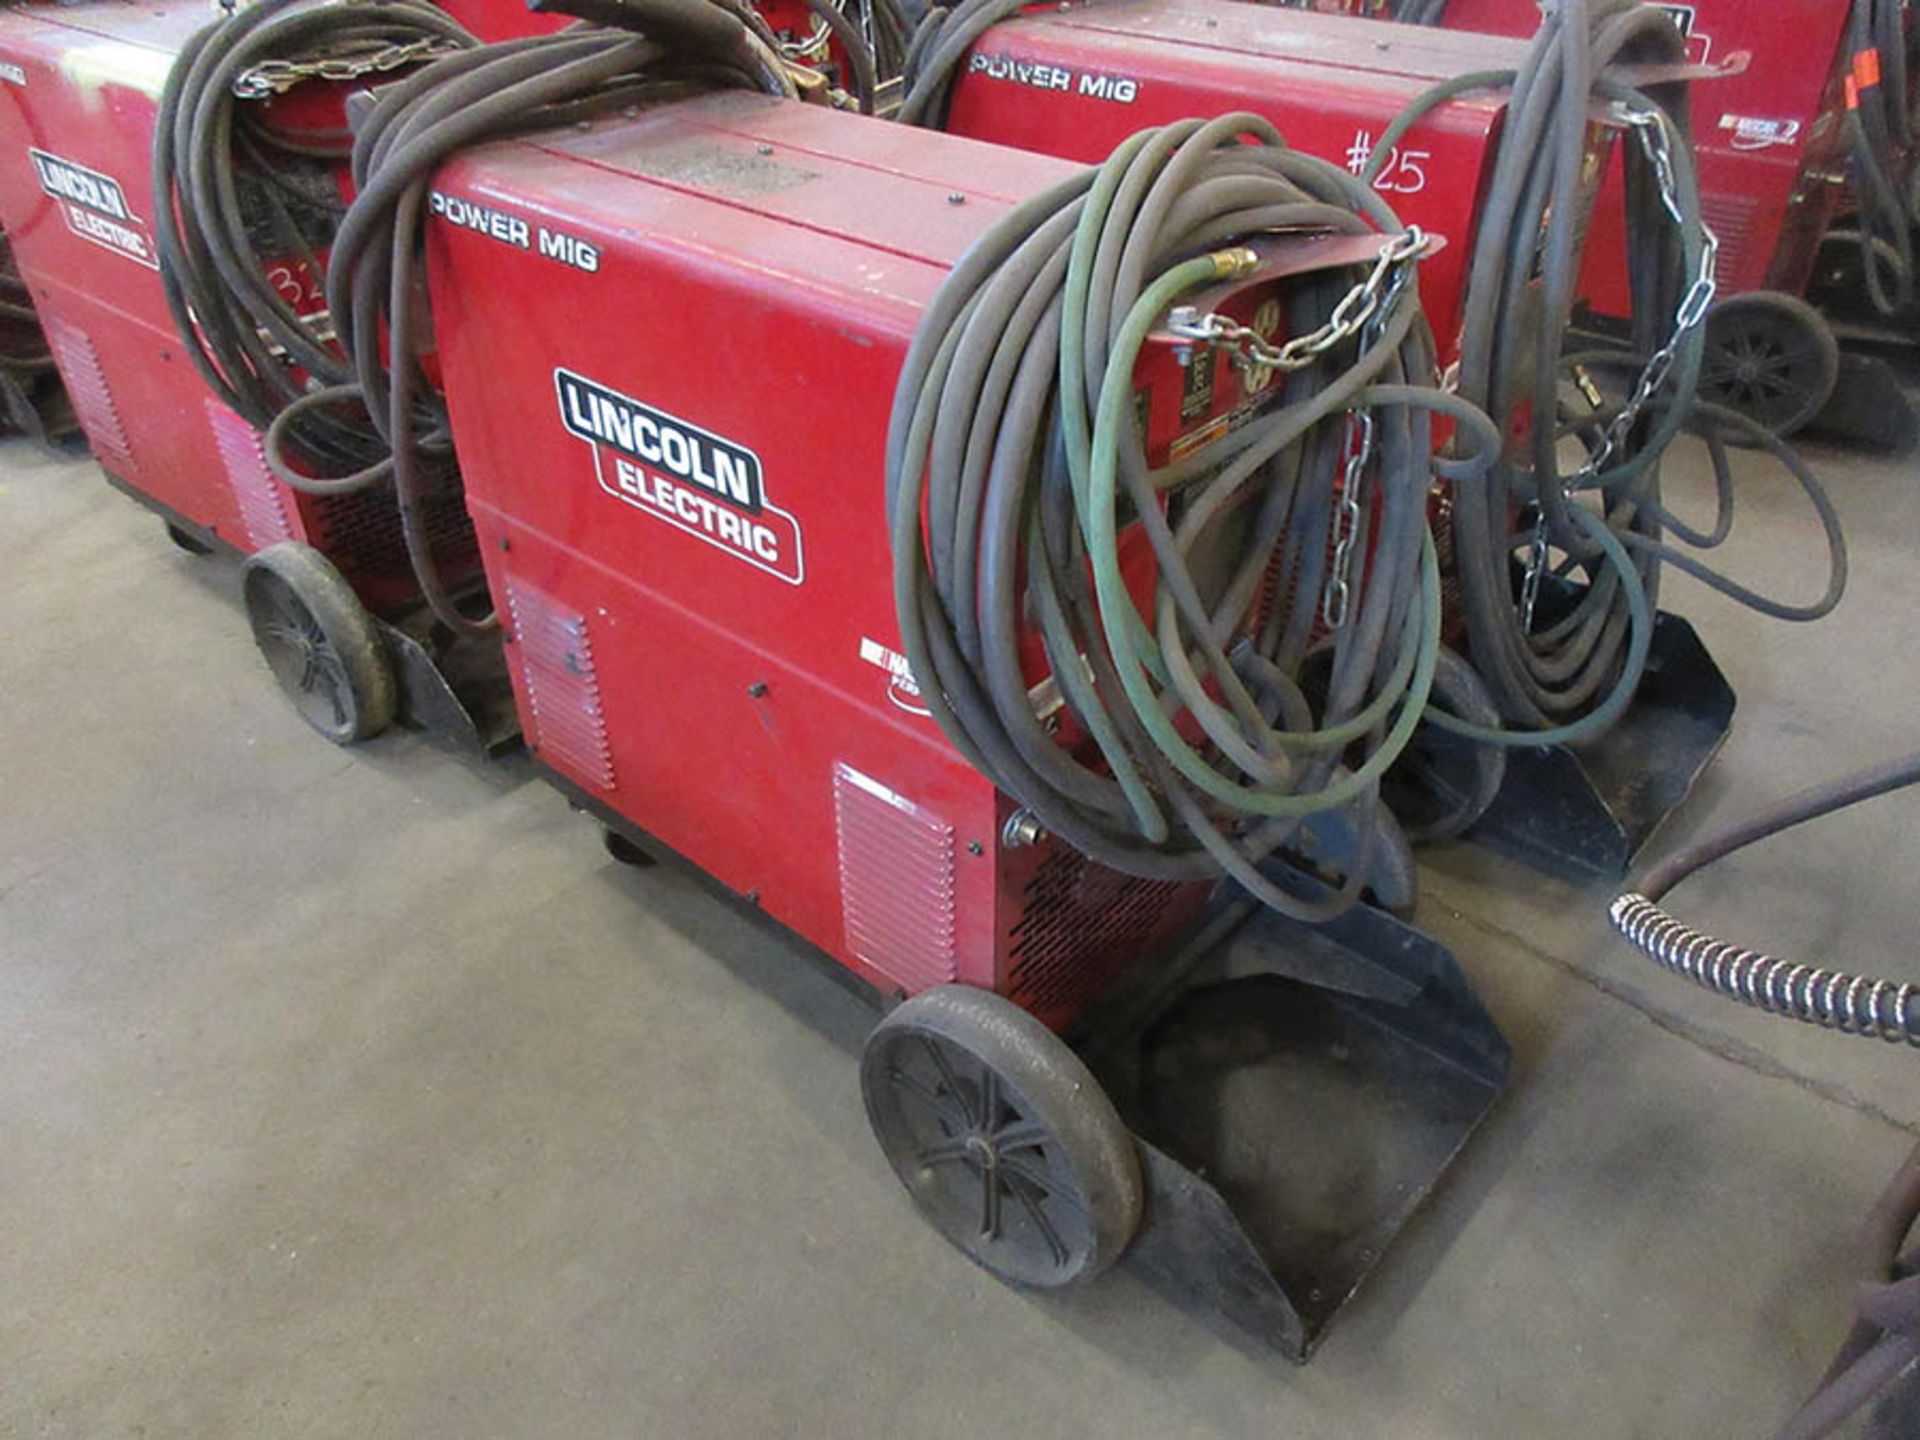 LINCOLN ELECTRIC 350MP POWER MIG WELDER WITH TWECO WELDSKILL MIG GUN - Image 2 of 3